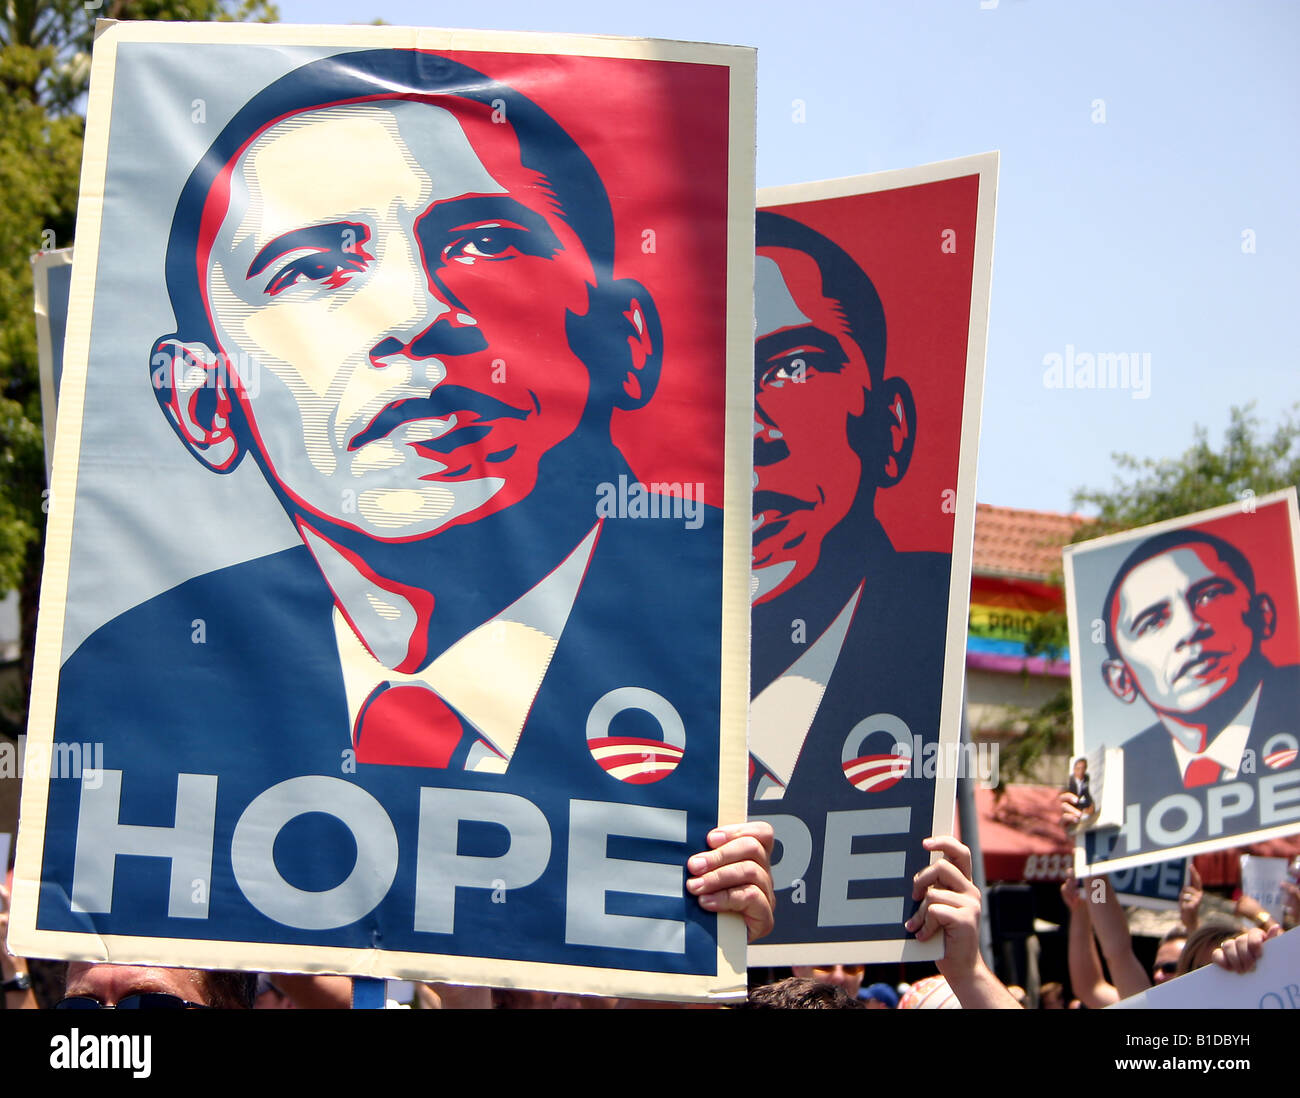 Obama supporters march carrying HOPE posters Stock Photo